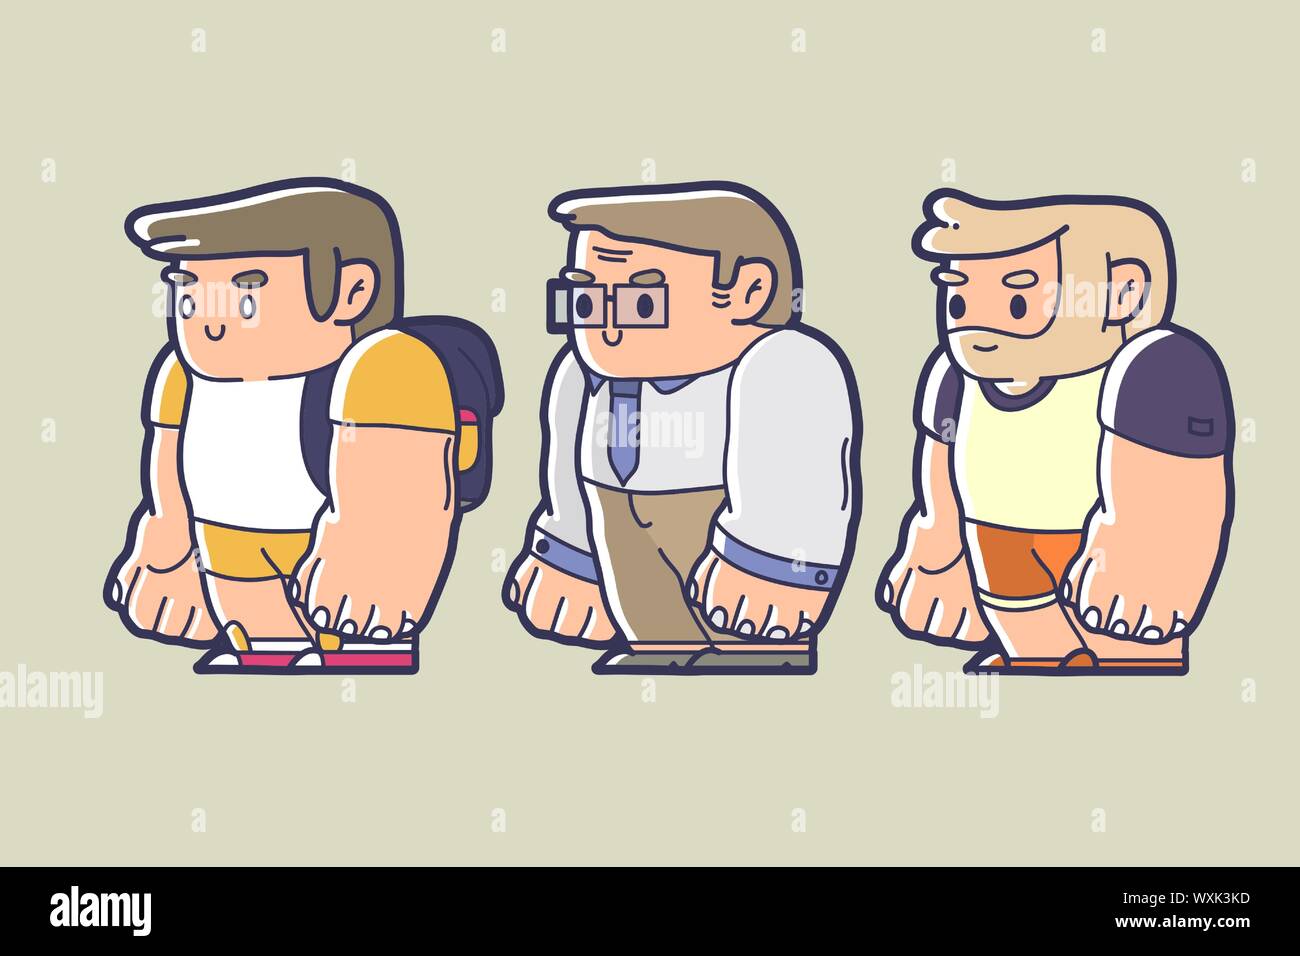 character design of a kid, working man, and an old man chibi Stock Vector